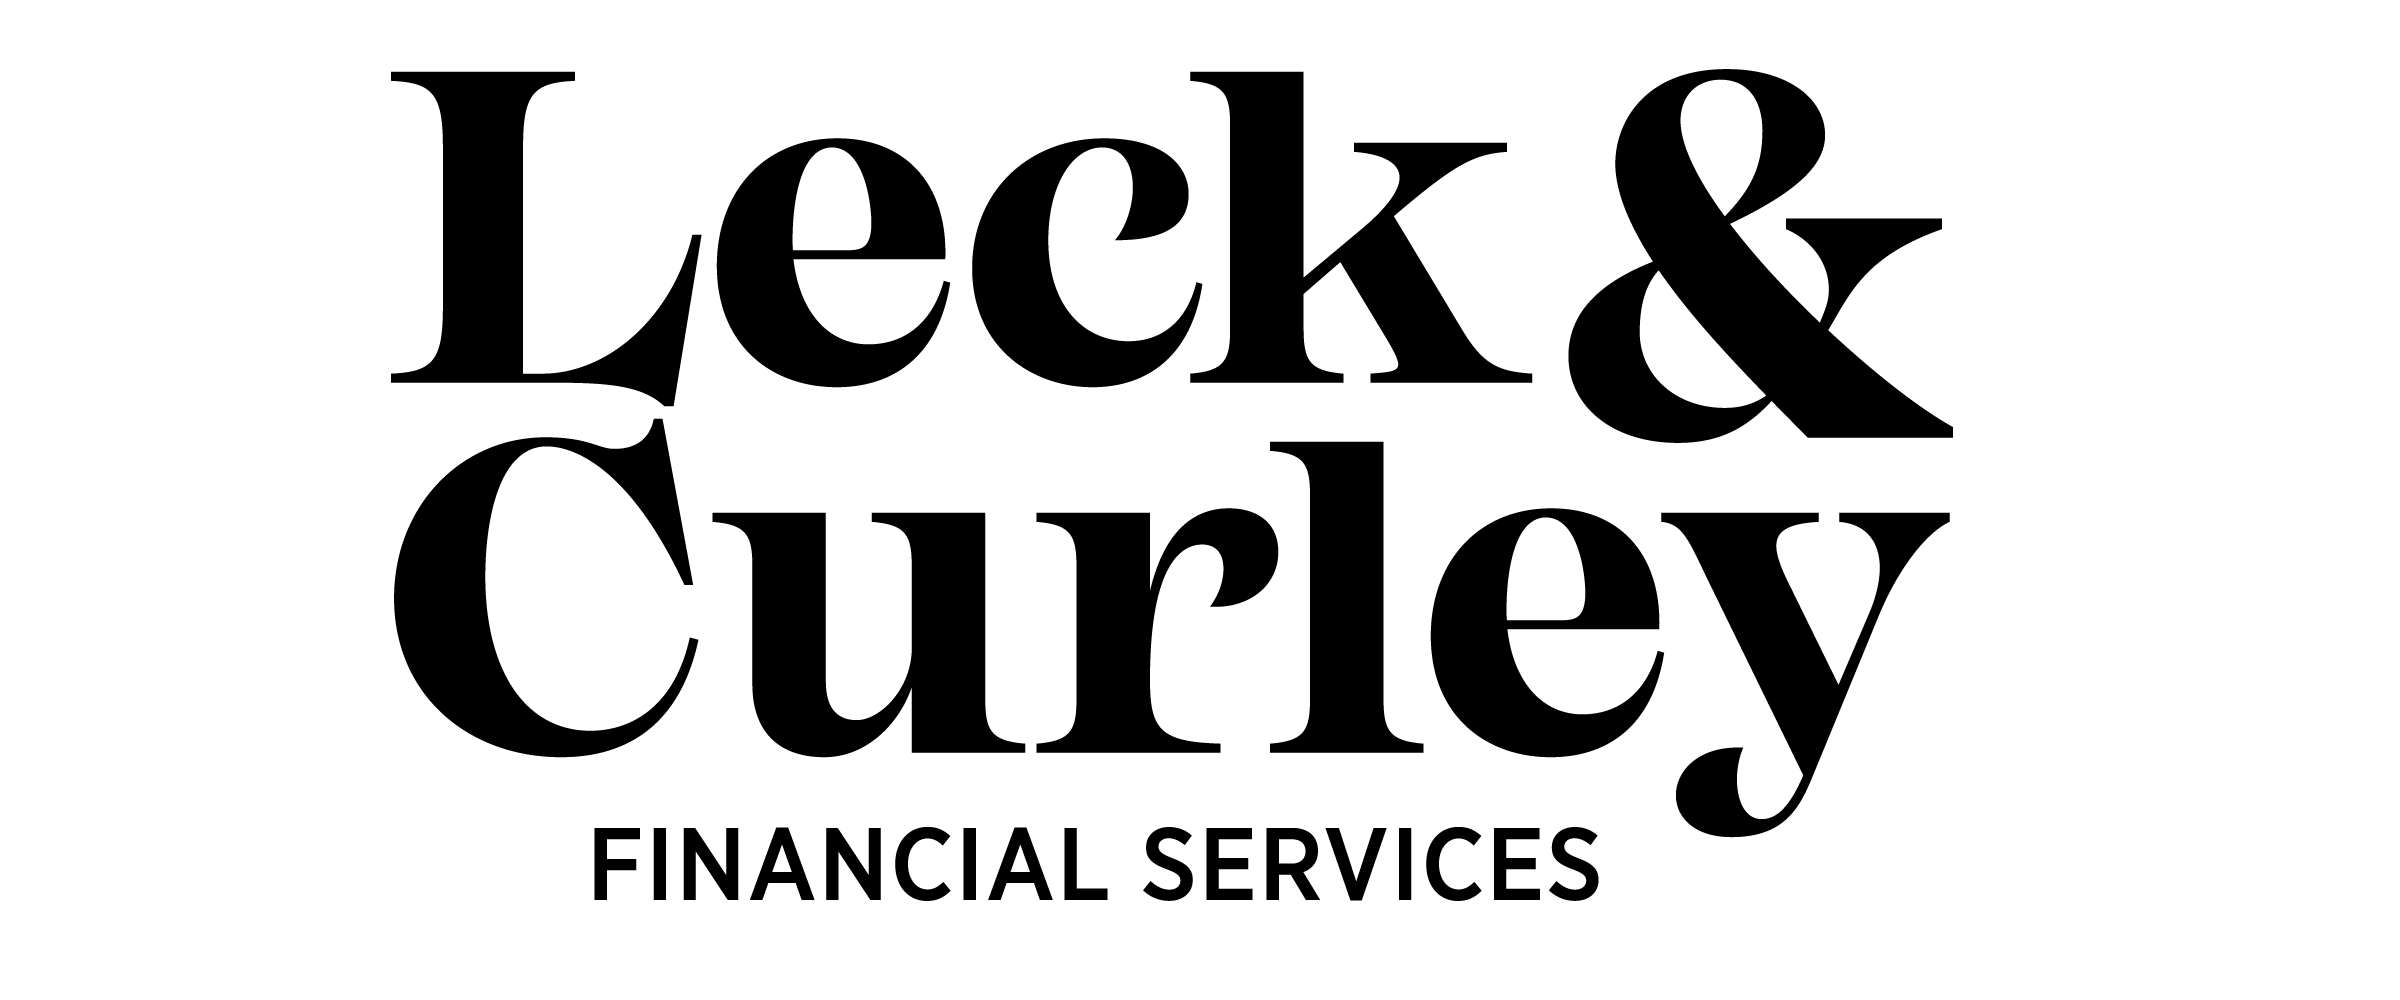 Leck & Curley Financial Services - Logo